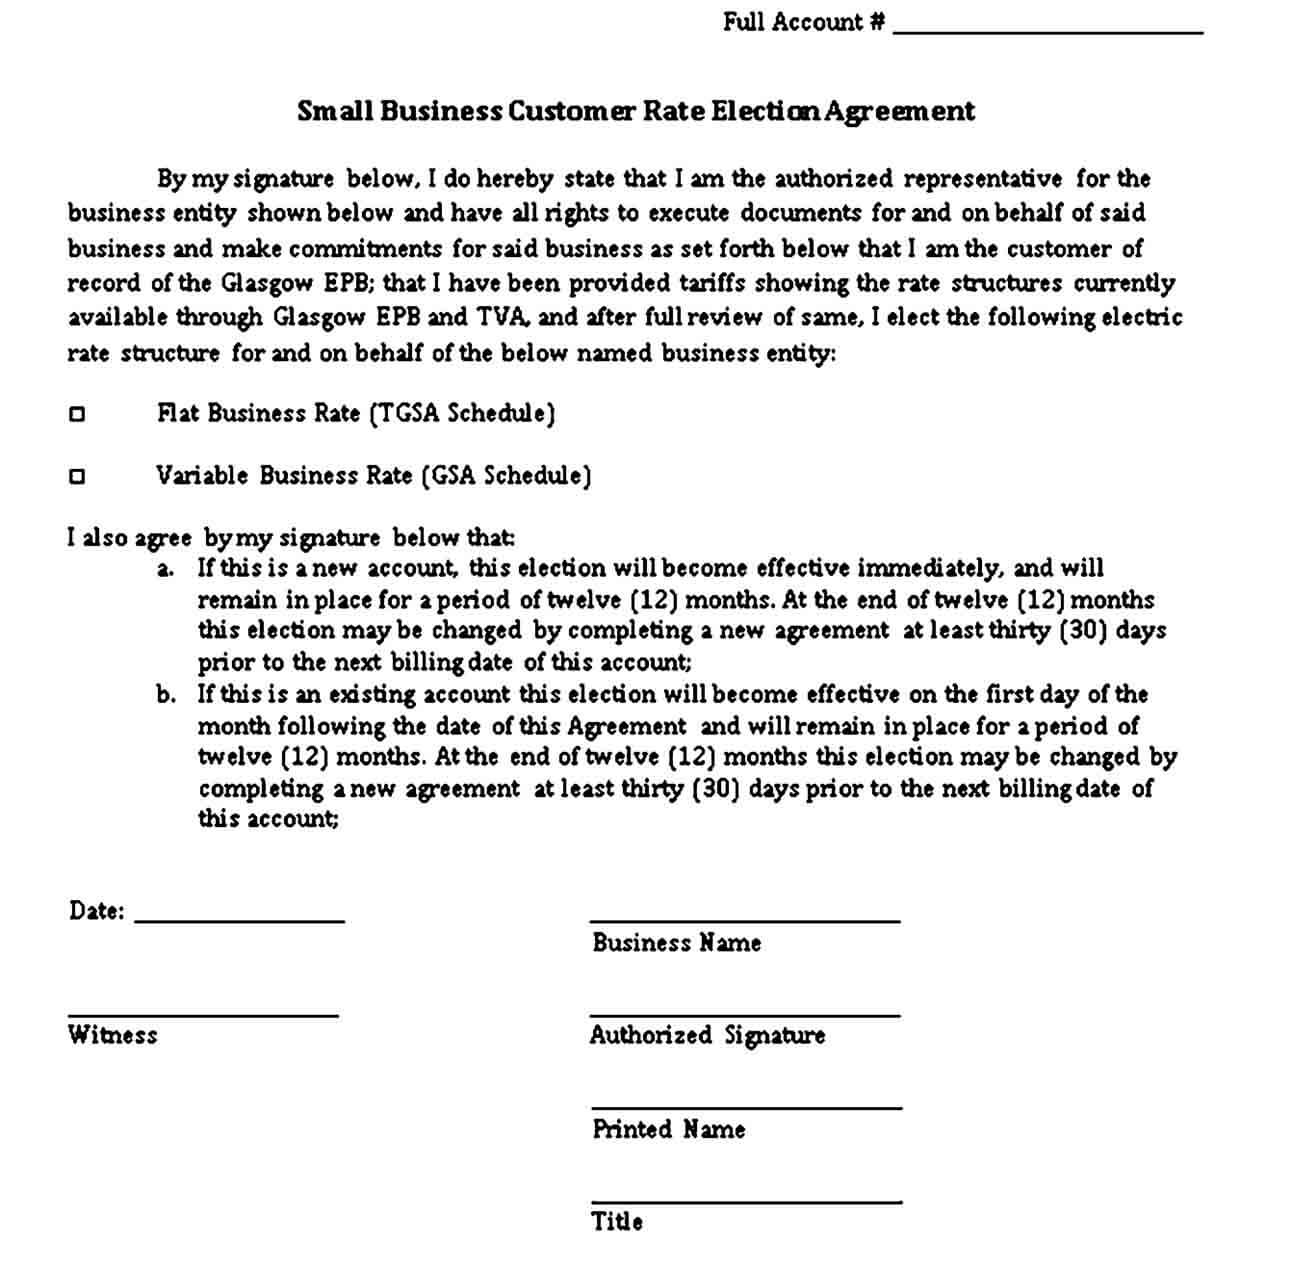 Basic Small Business Agreement in PDF